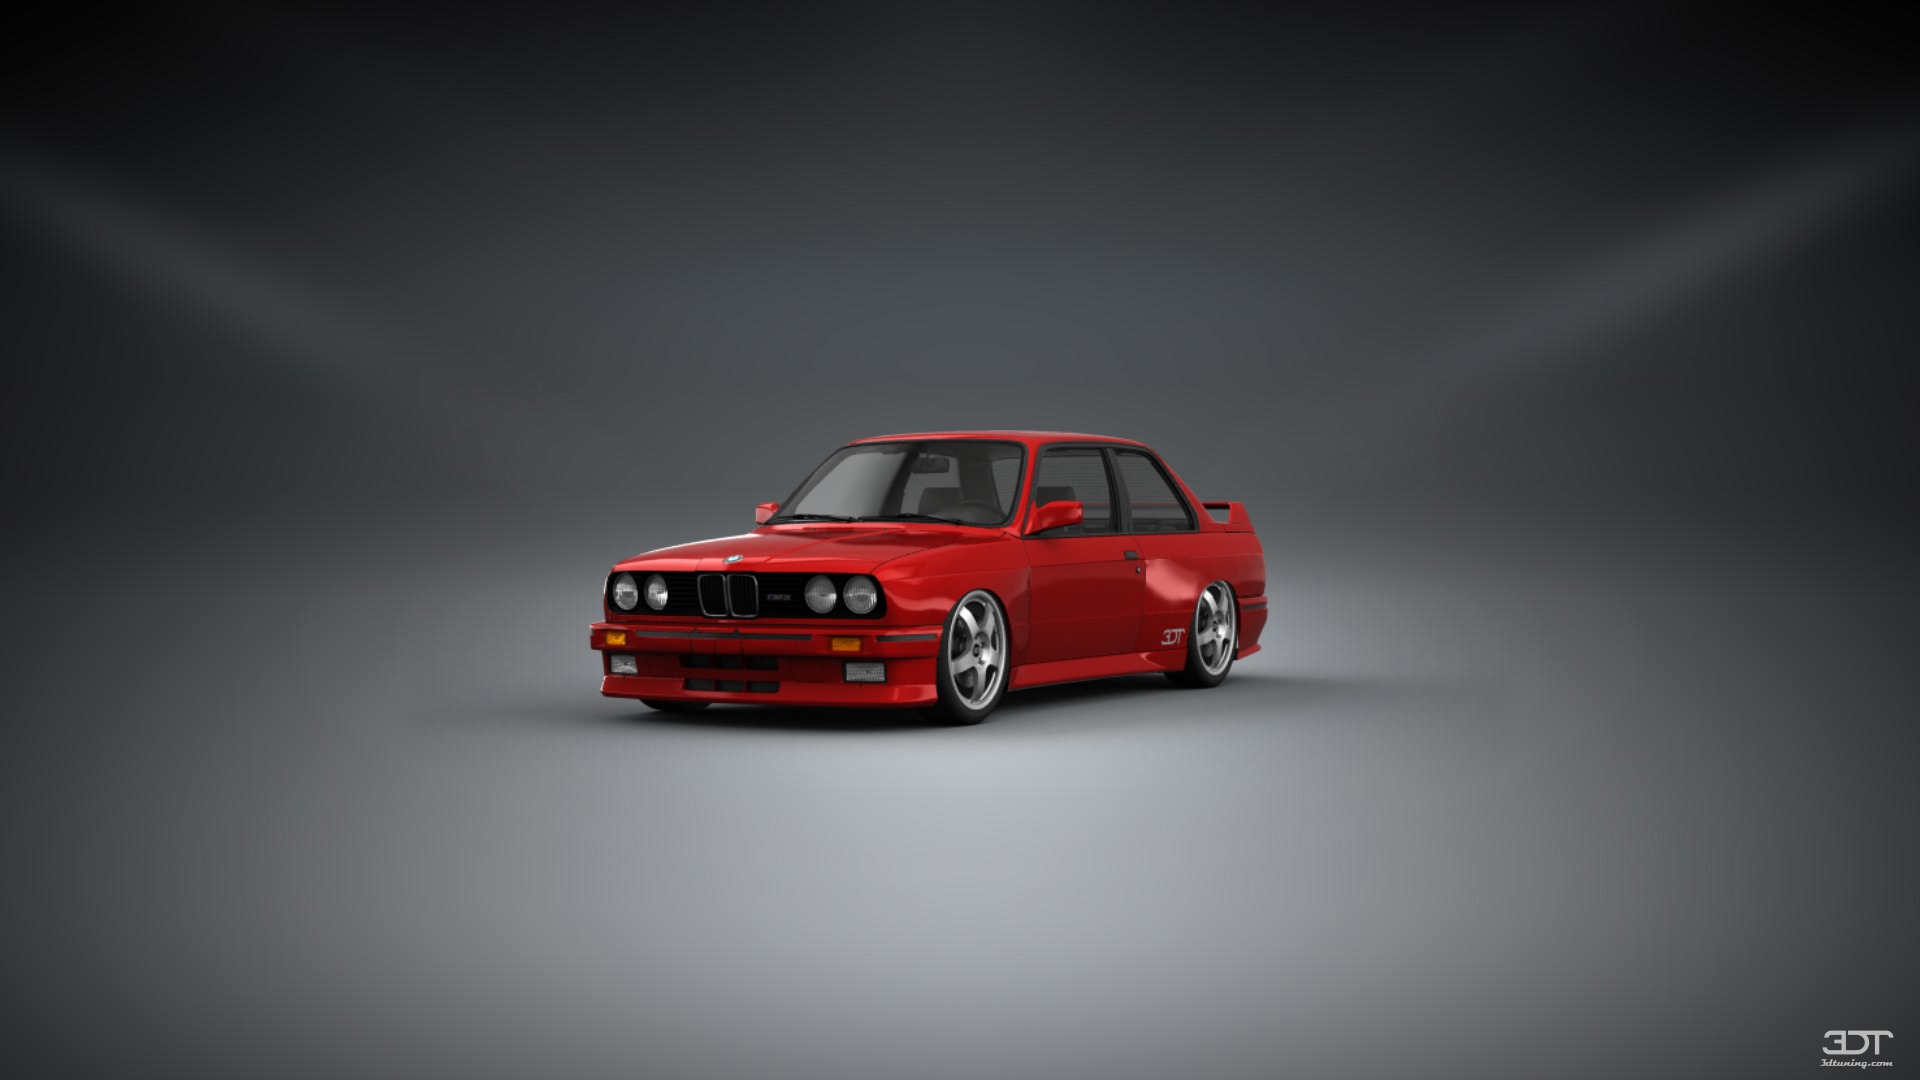 BMW M3 Coupe 1985 tuning